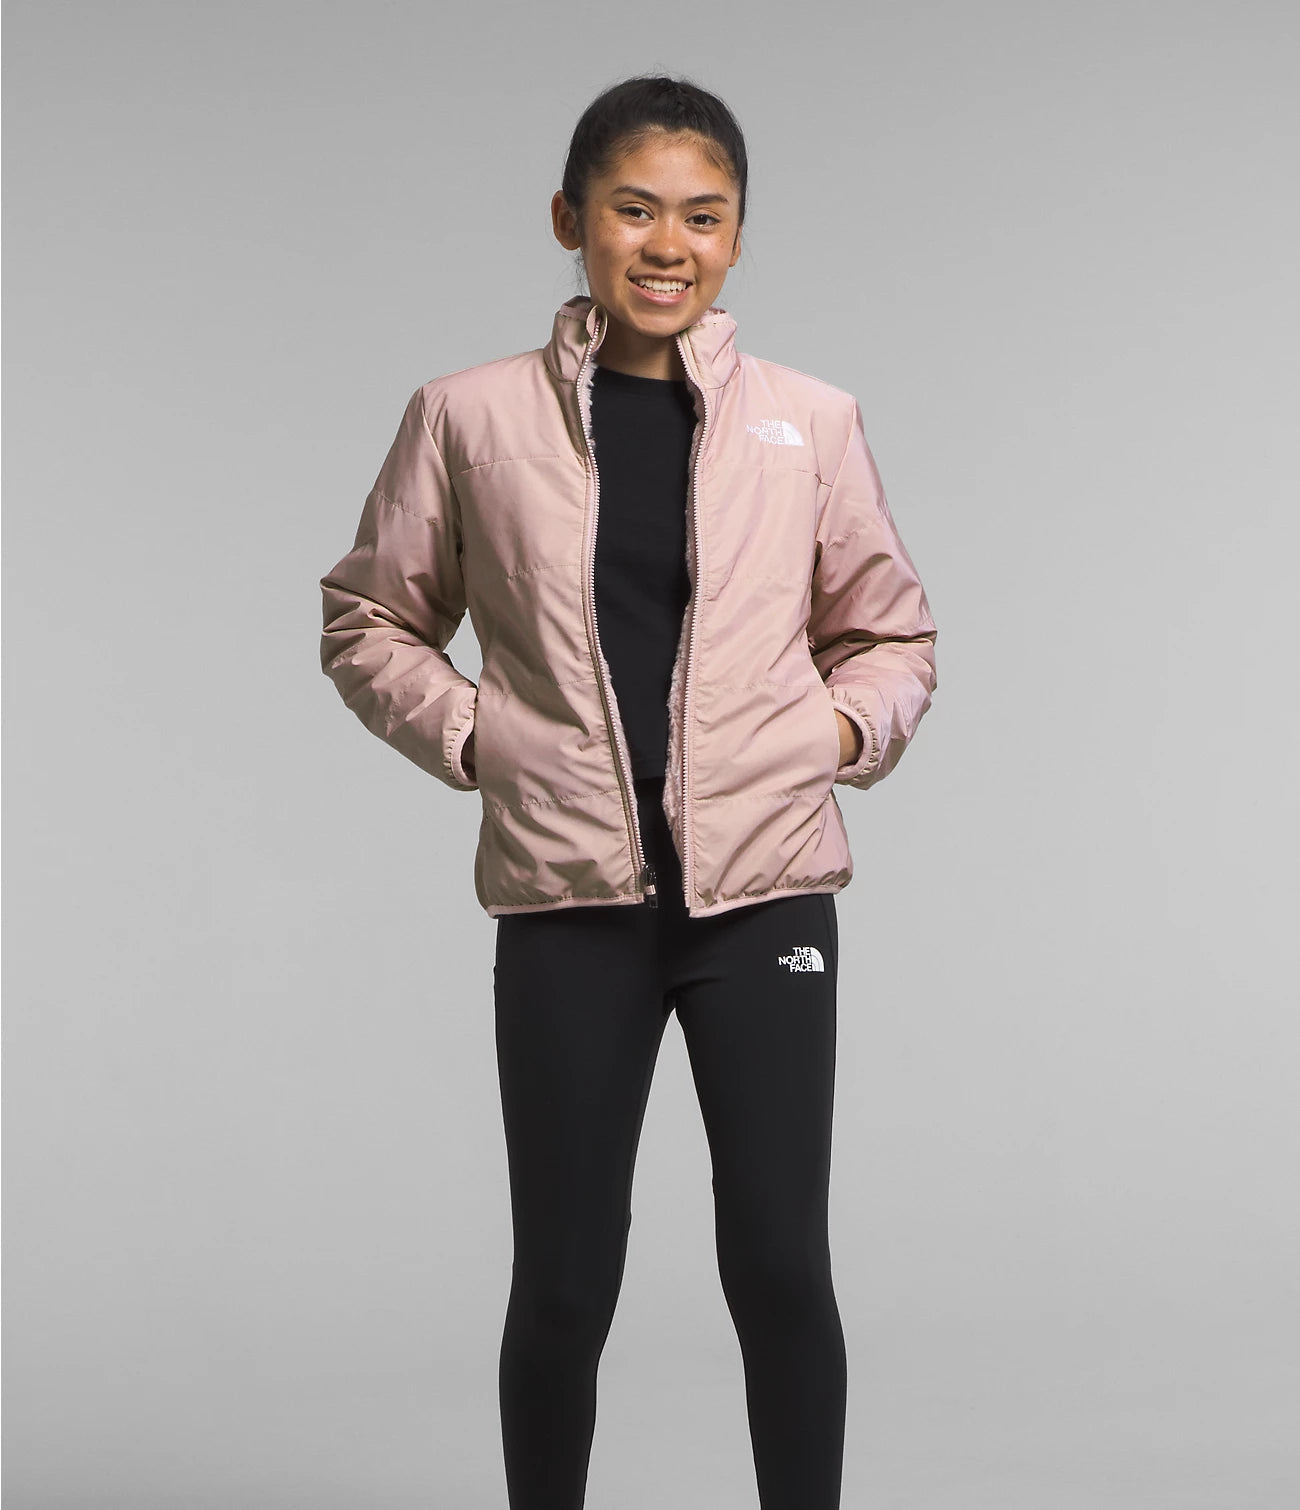 THE NORTH FACE Girl's Outerwear PINK MOSS / S North Face Girls’ Reversible Mossbud Jacket || David's Clothing NF0A82YCLK6